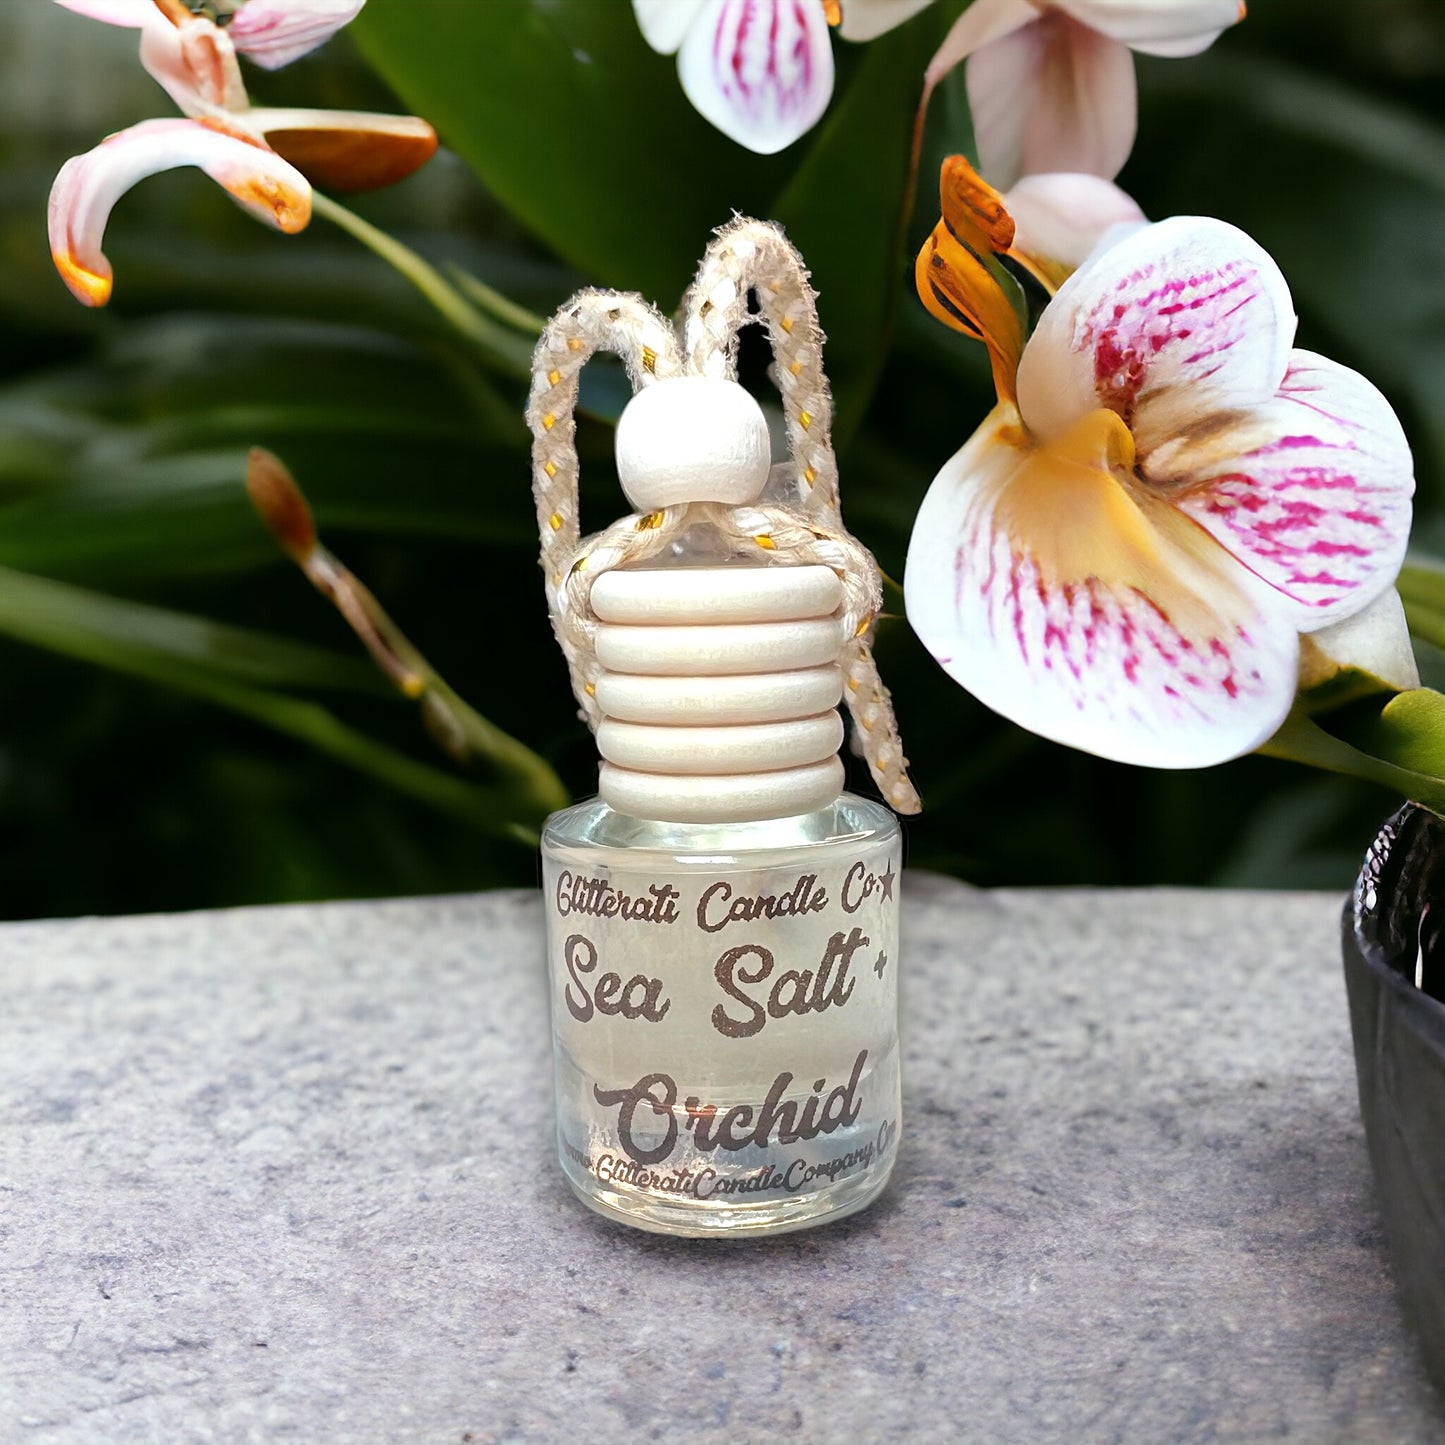 Sea Salt and Orchid Scented Hanging Car Oil Diffuser Freshener